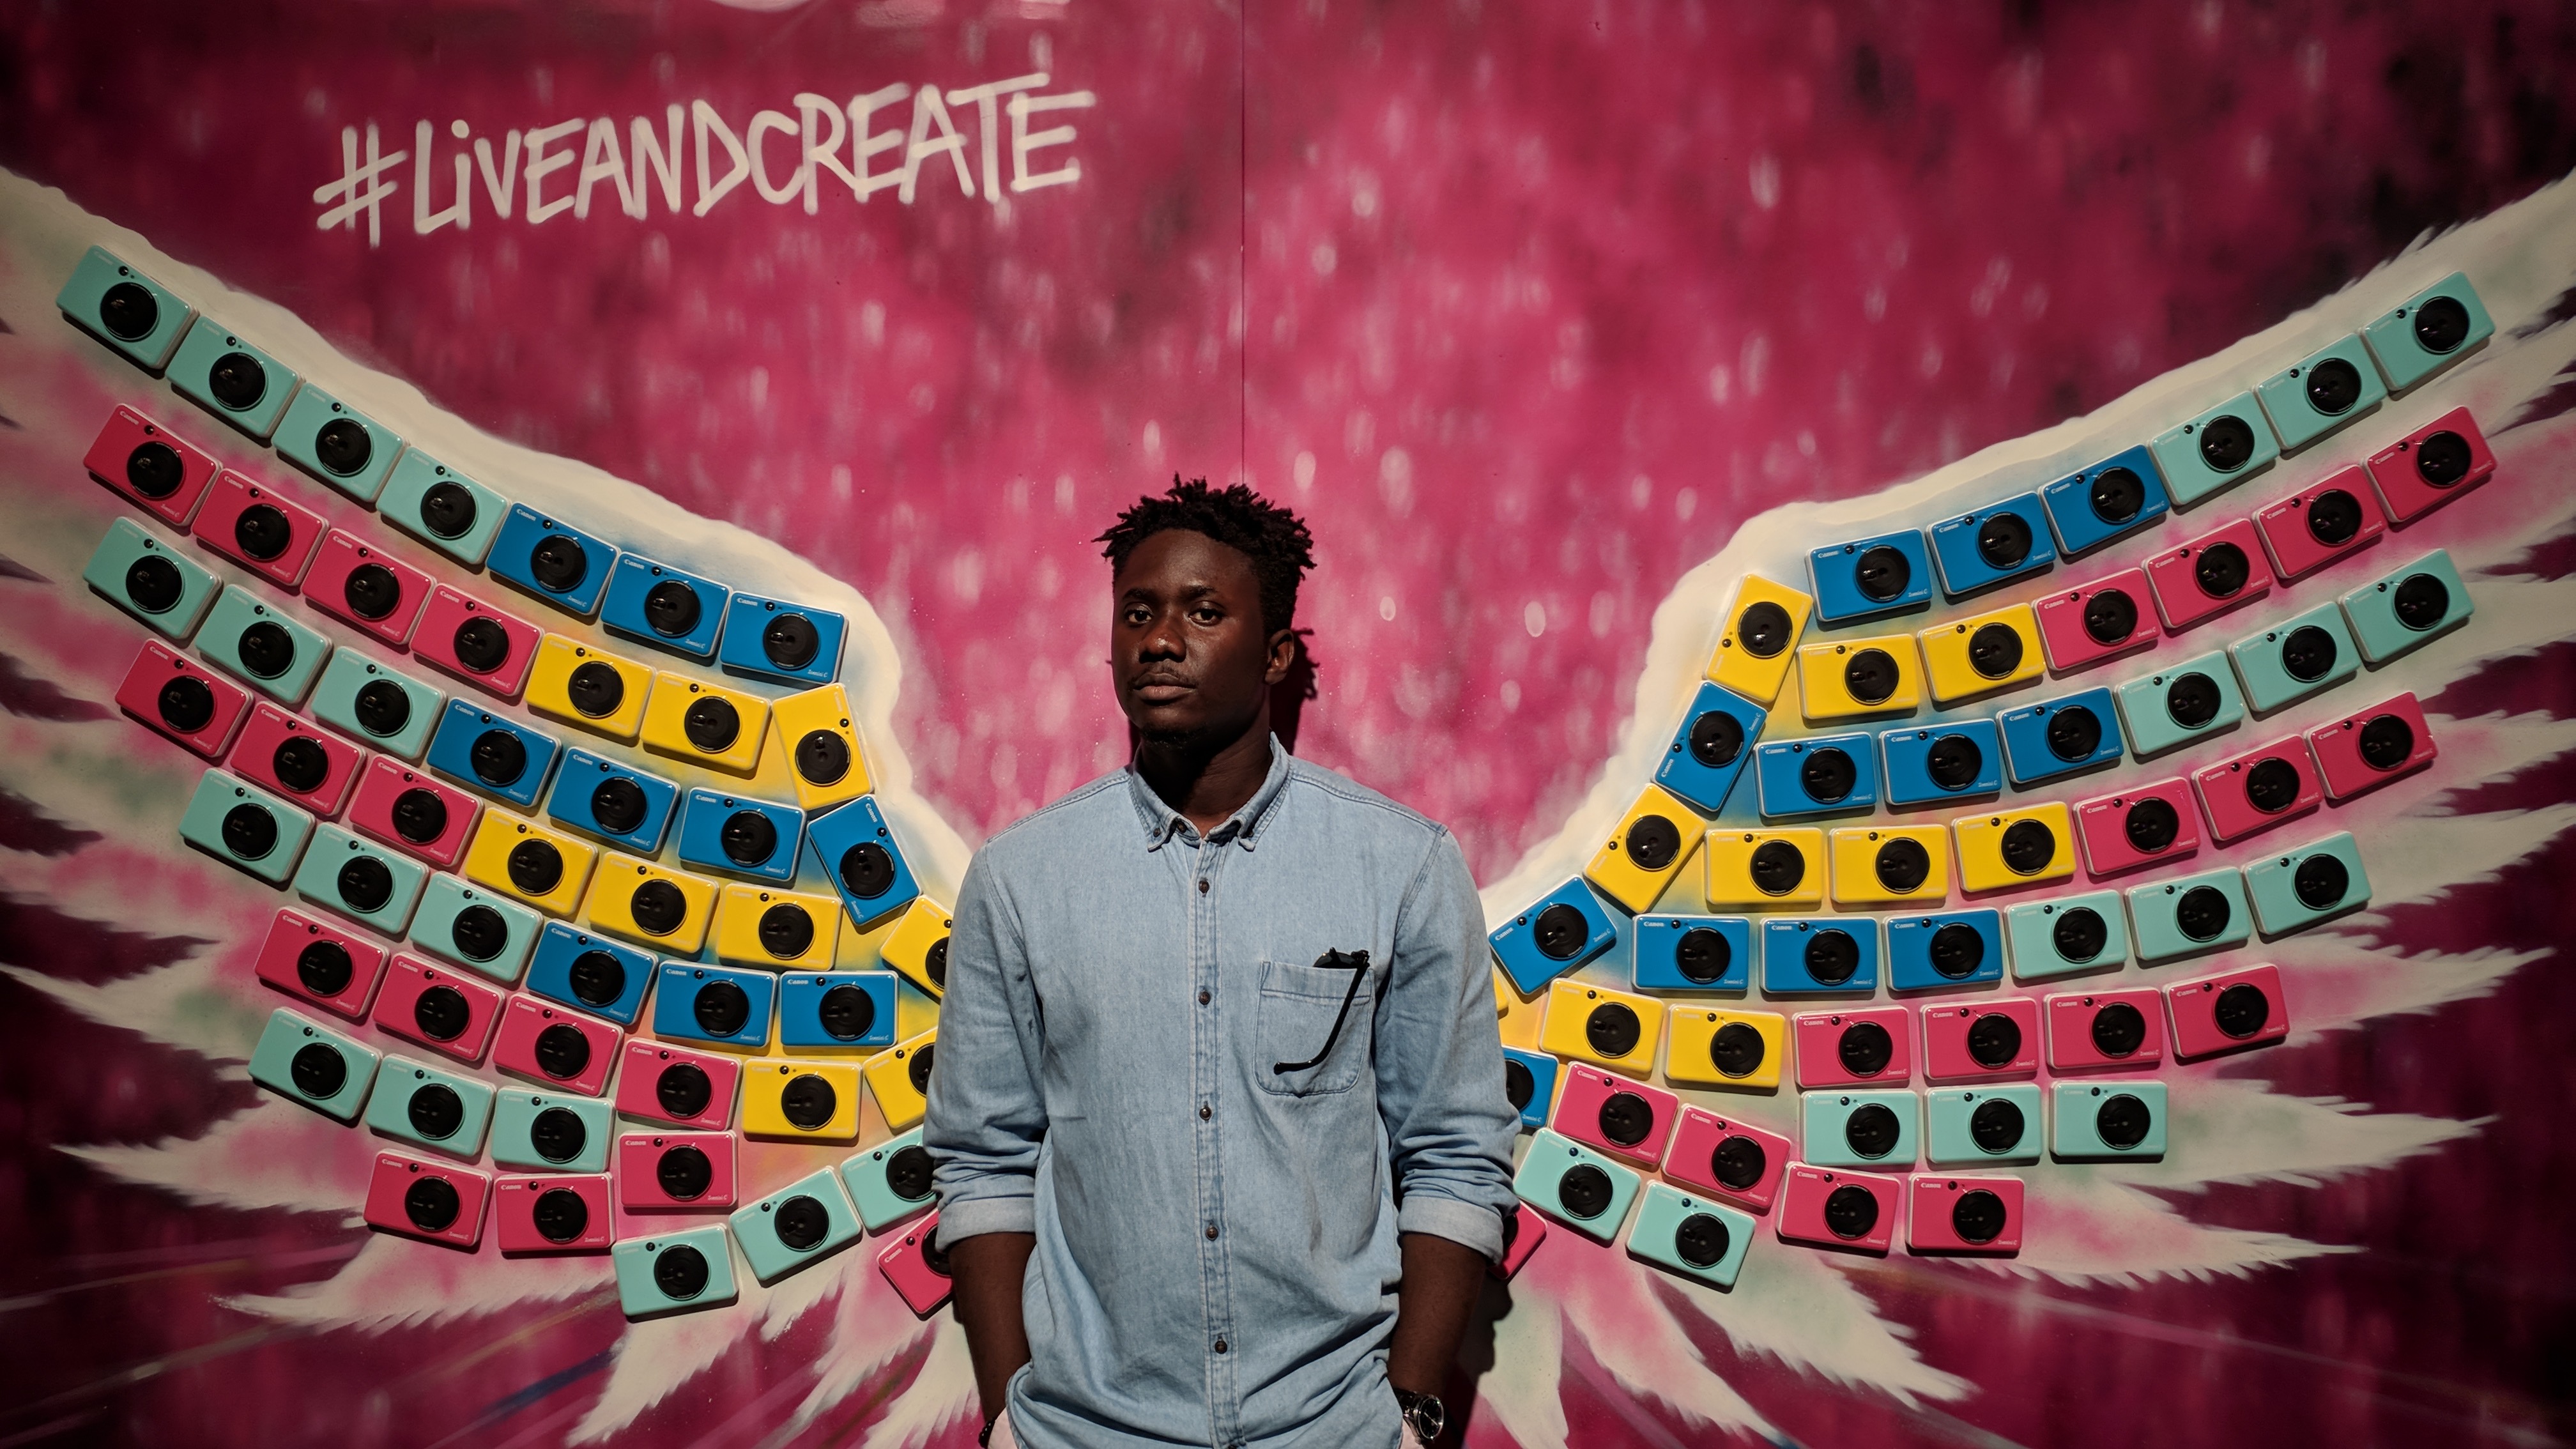 Portrait of Eyo against a mural that says #liveandcreate